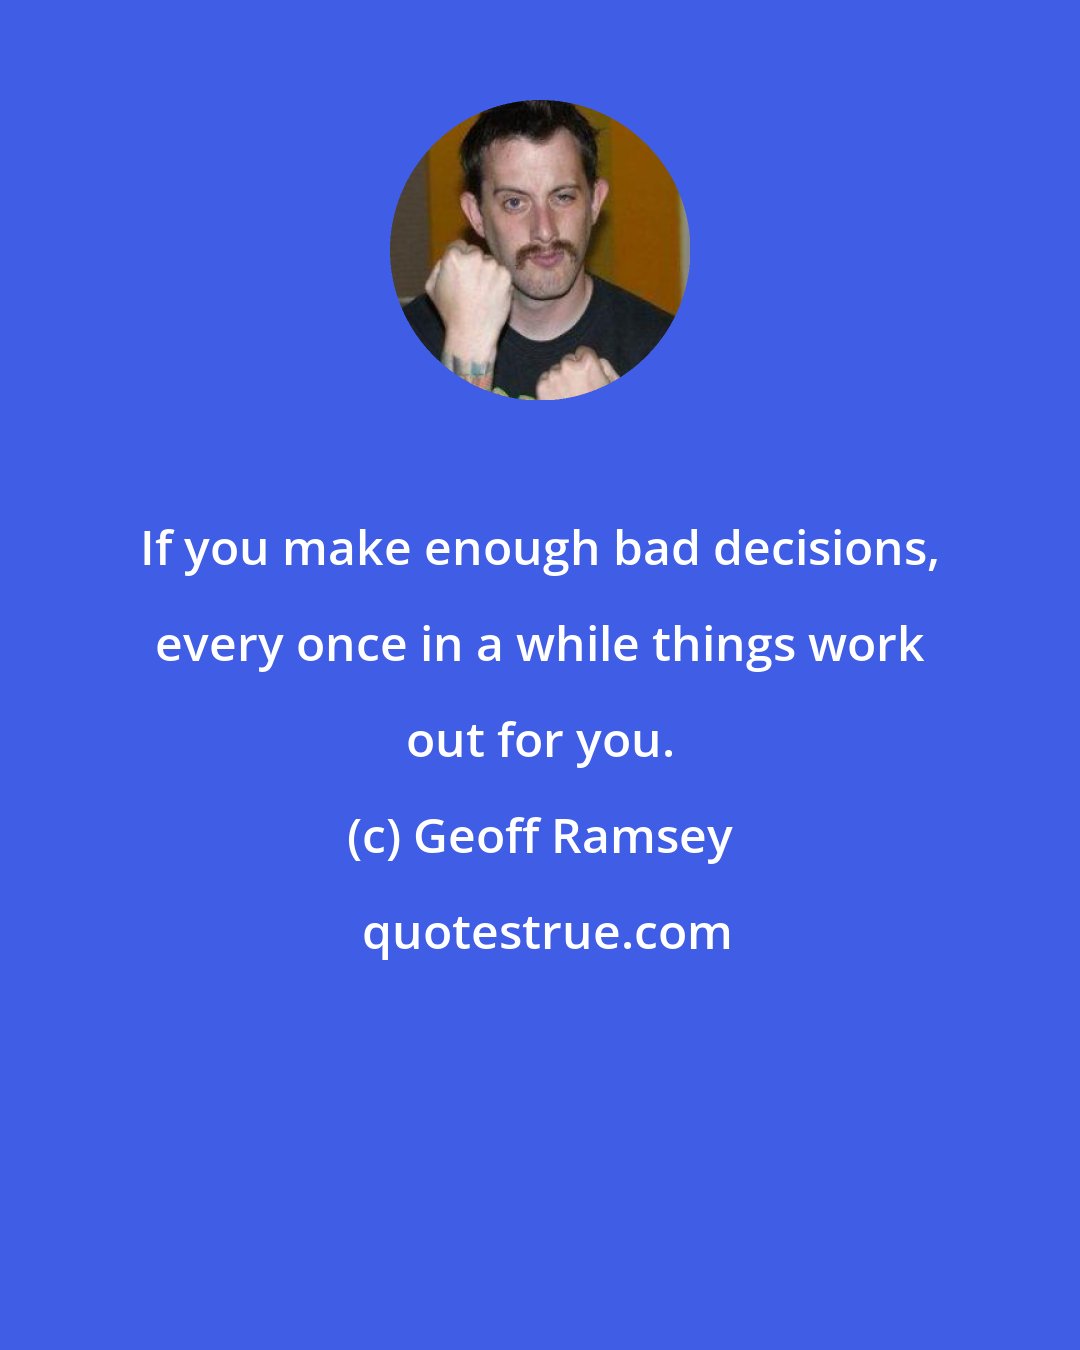 Geoff Ramsey: If you make enough bad decisions, every once in a while things work out for you.